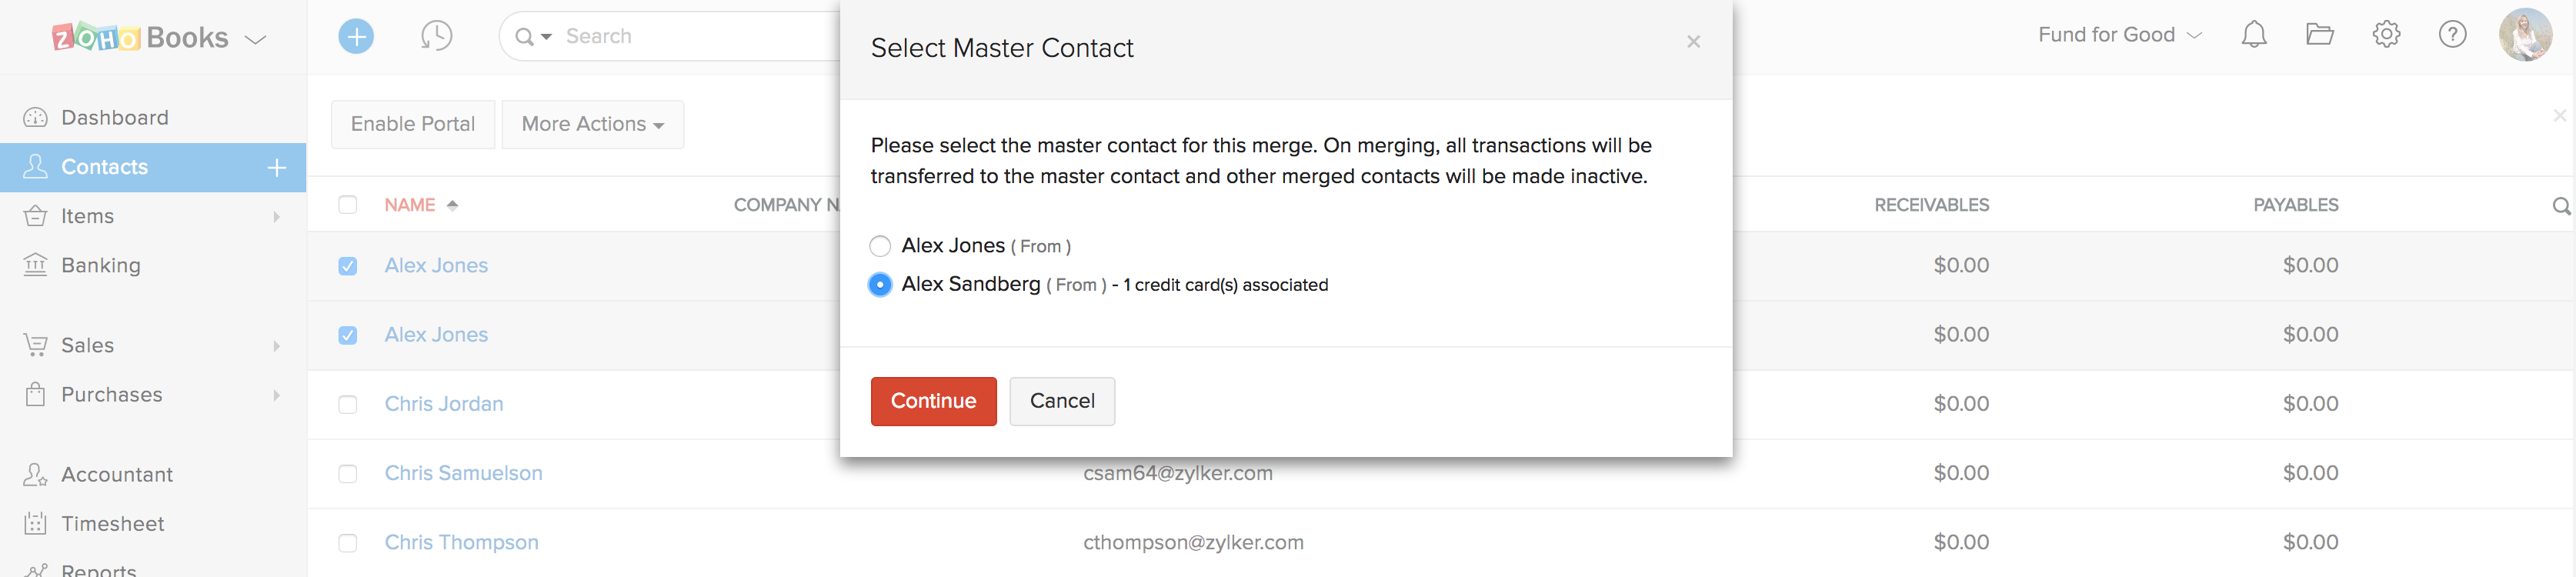 Merge Books contacts